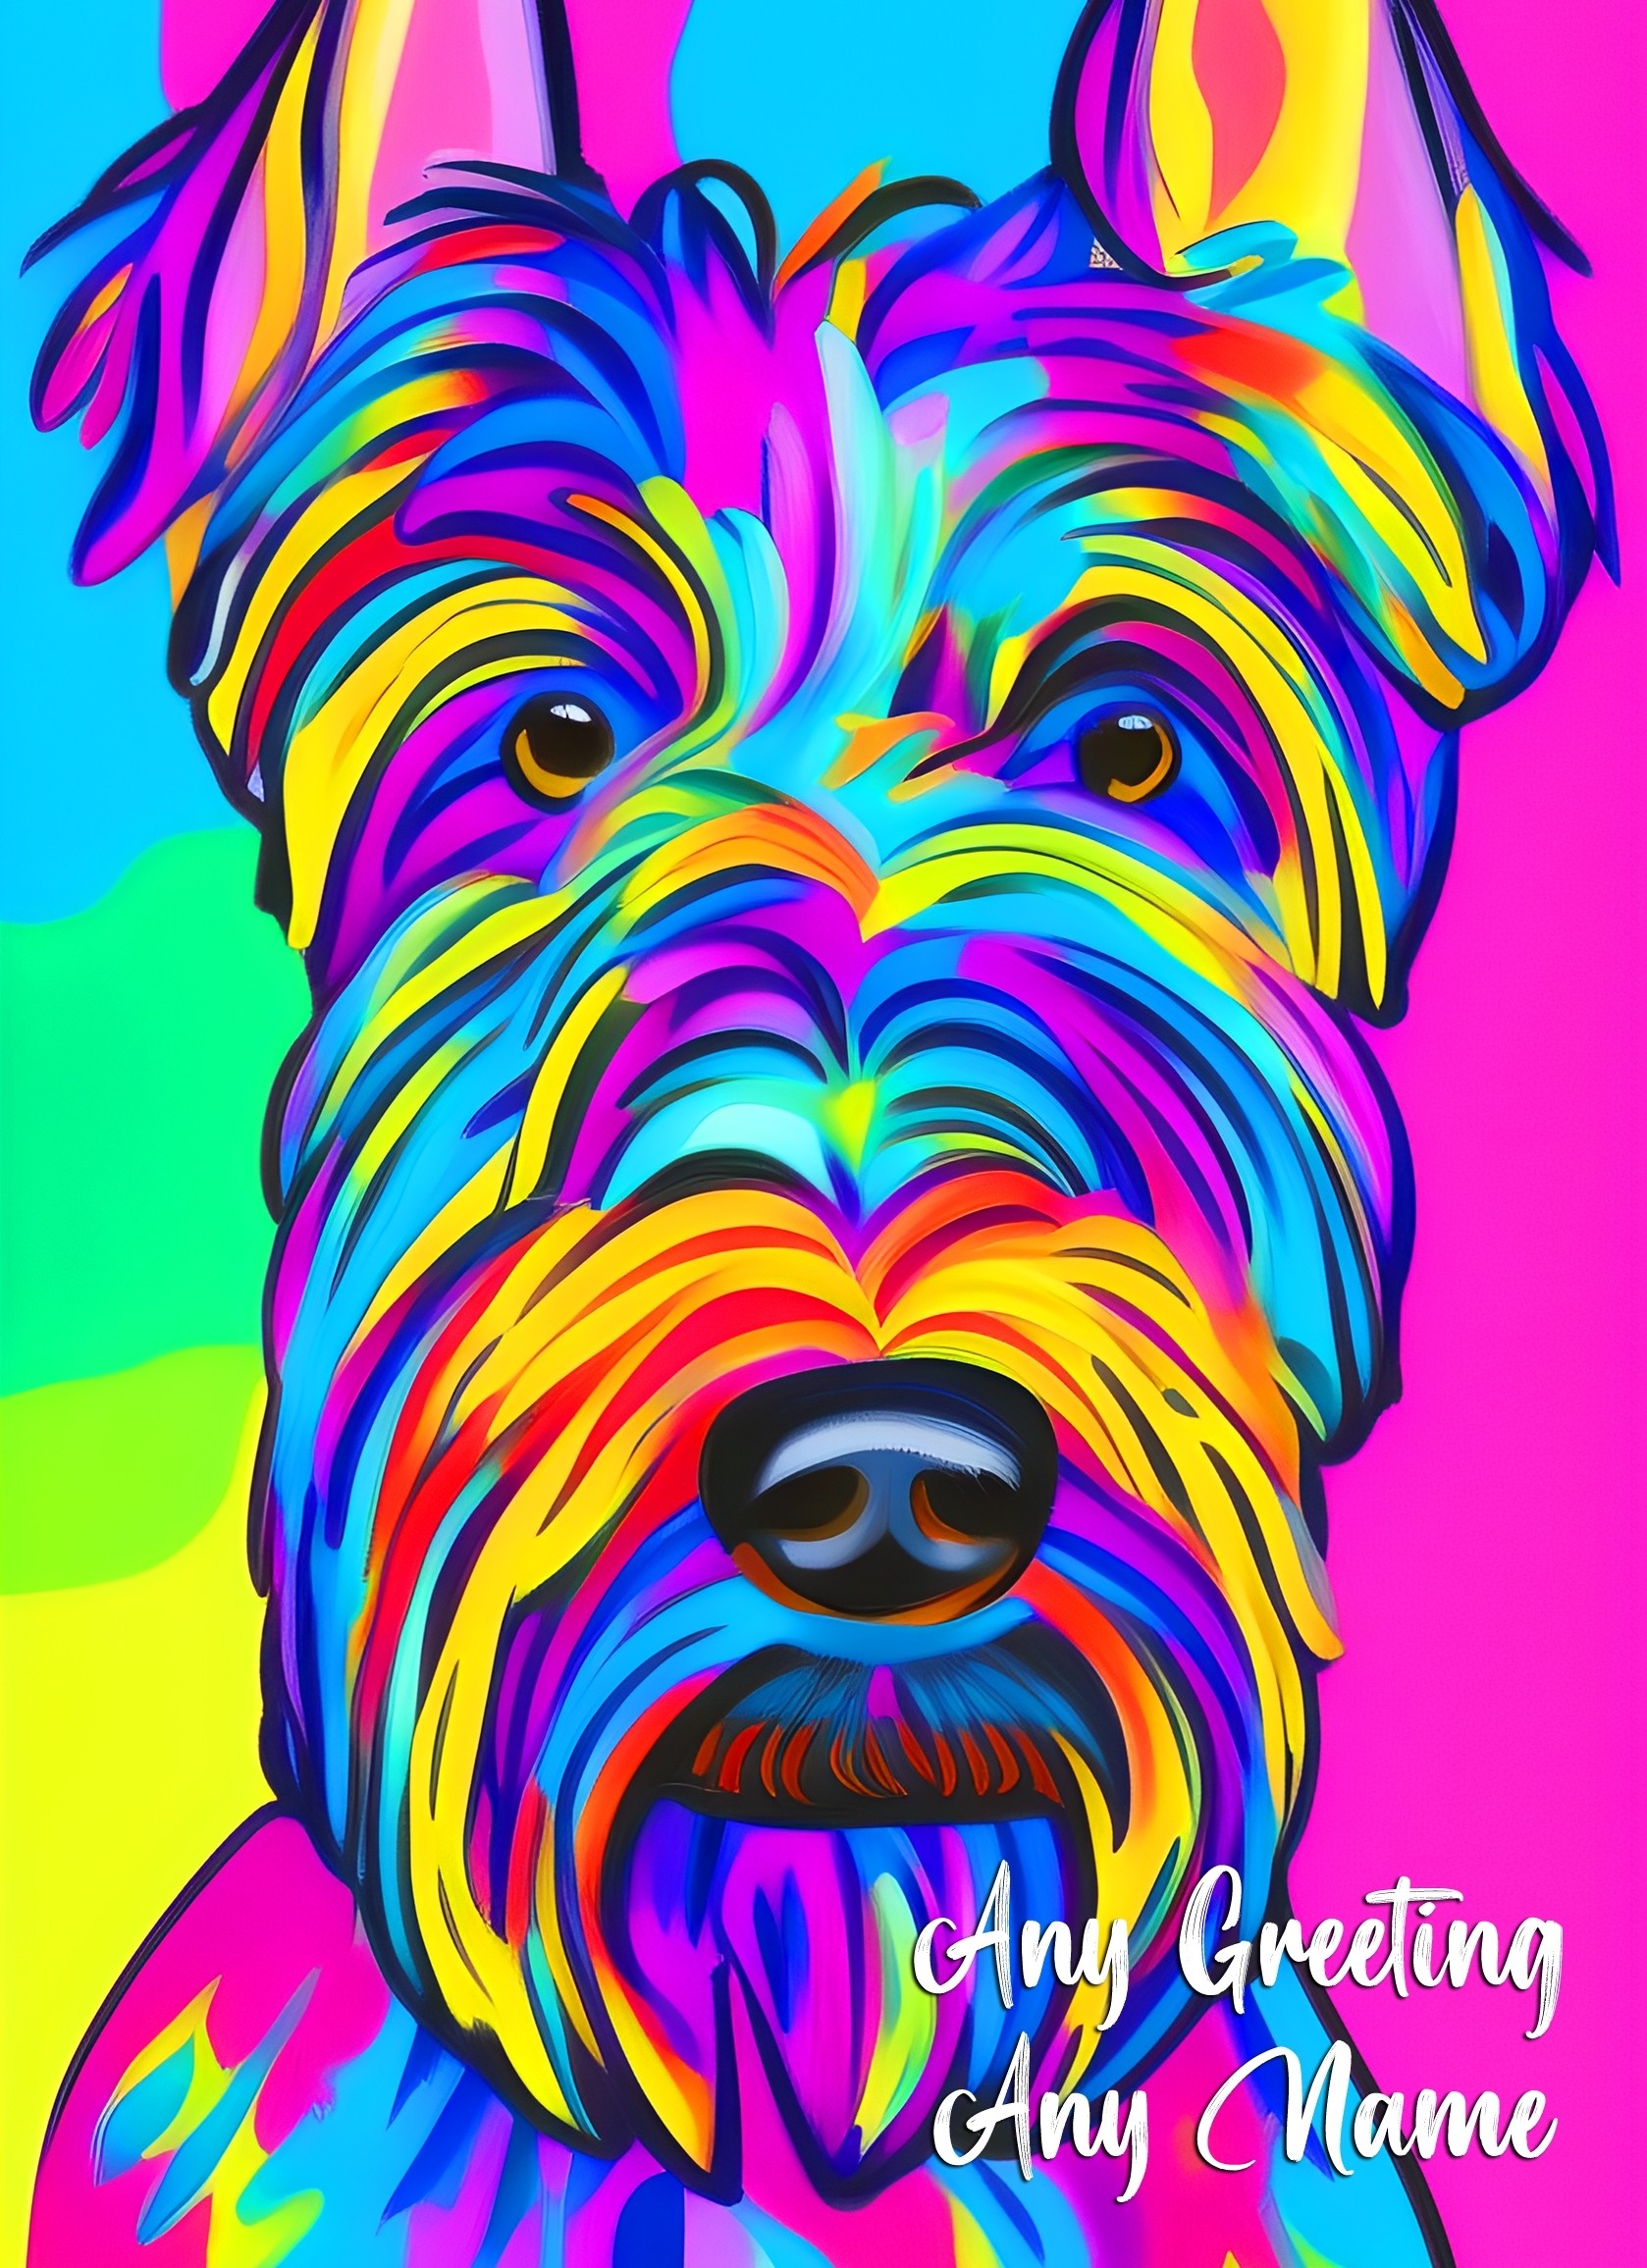 Personalised Scottish Terrier Dog Colourful Abstract Art Blank Greeting Card (Birthday, Fathers Day, Any Occasion)